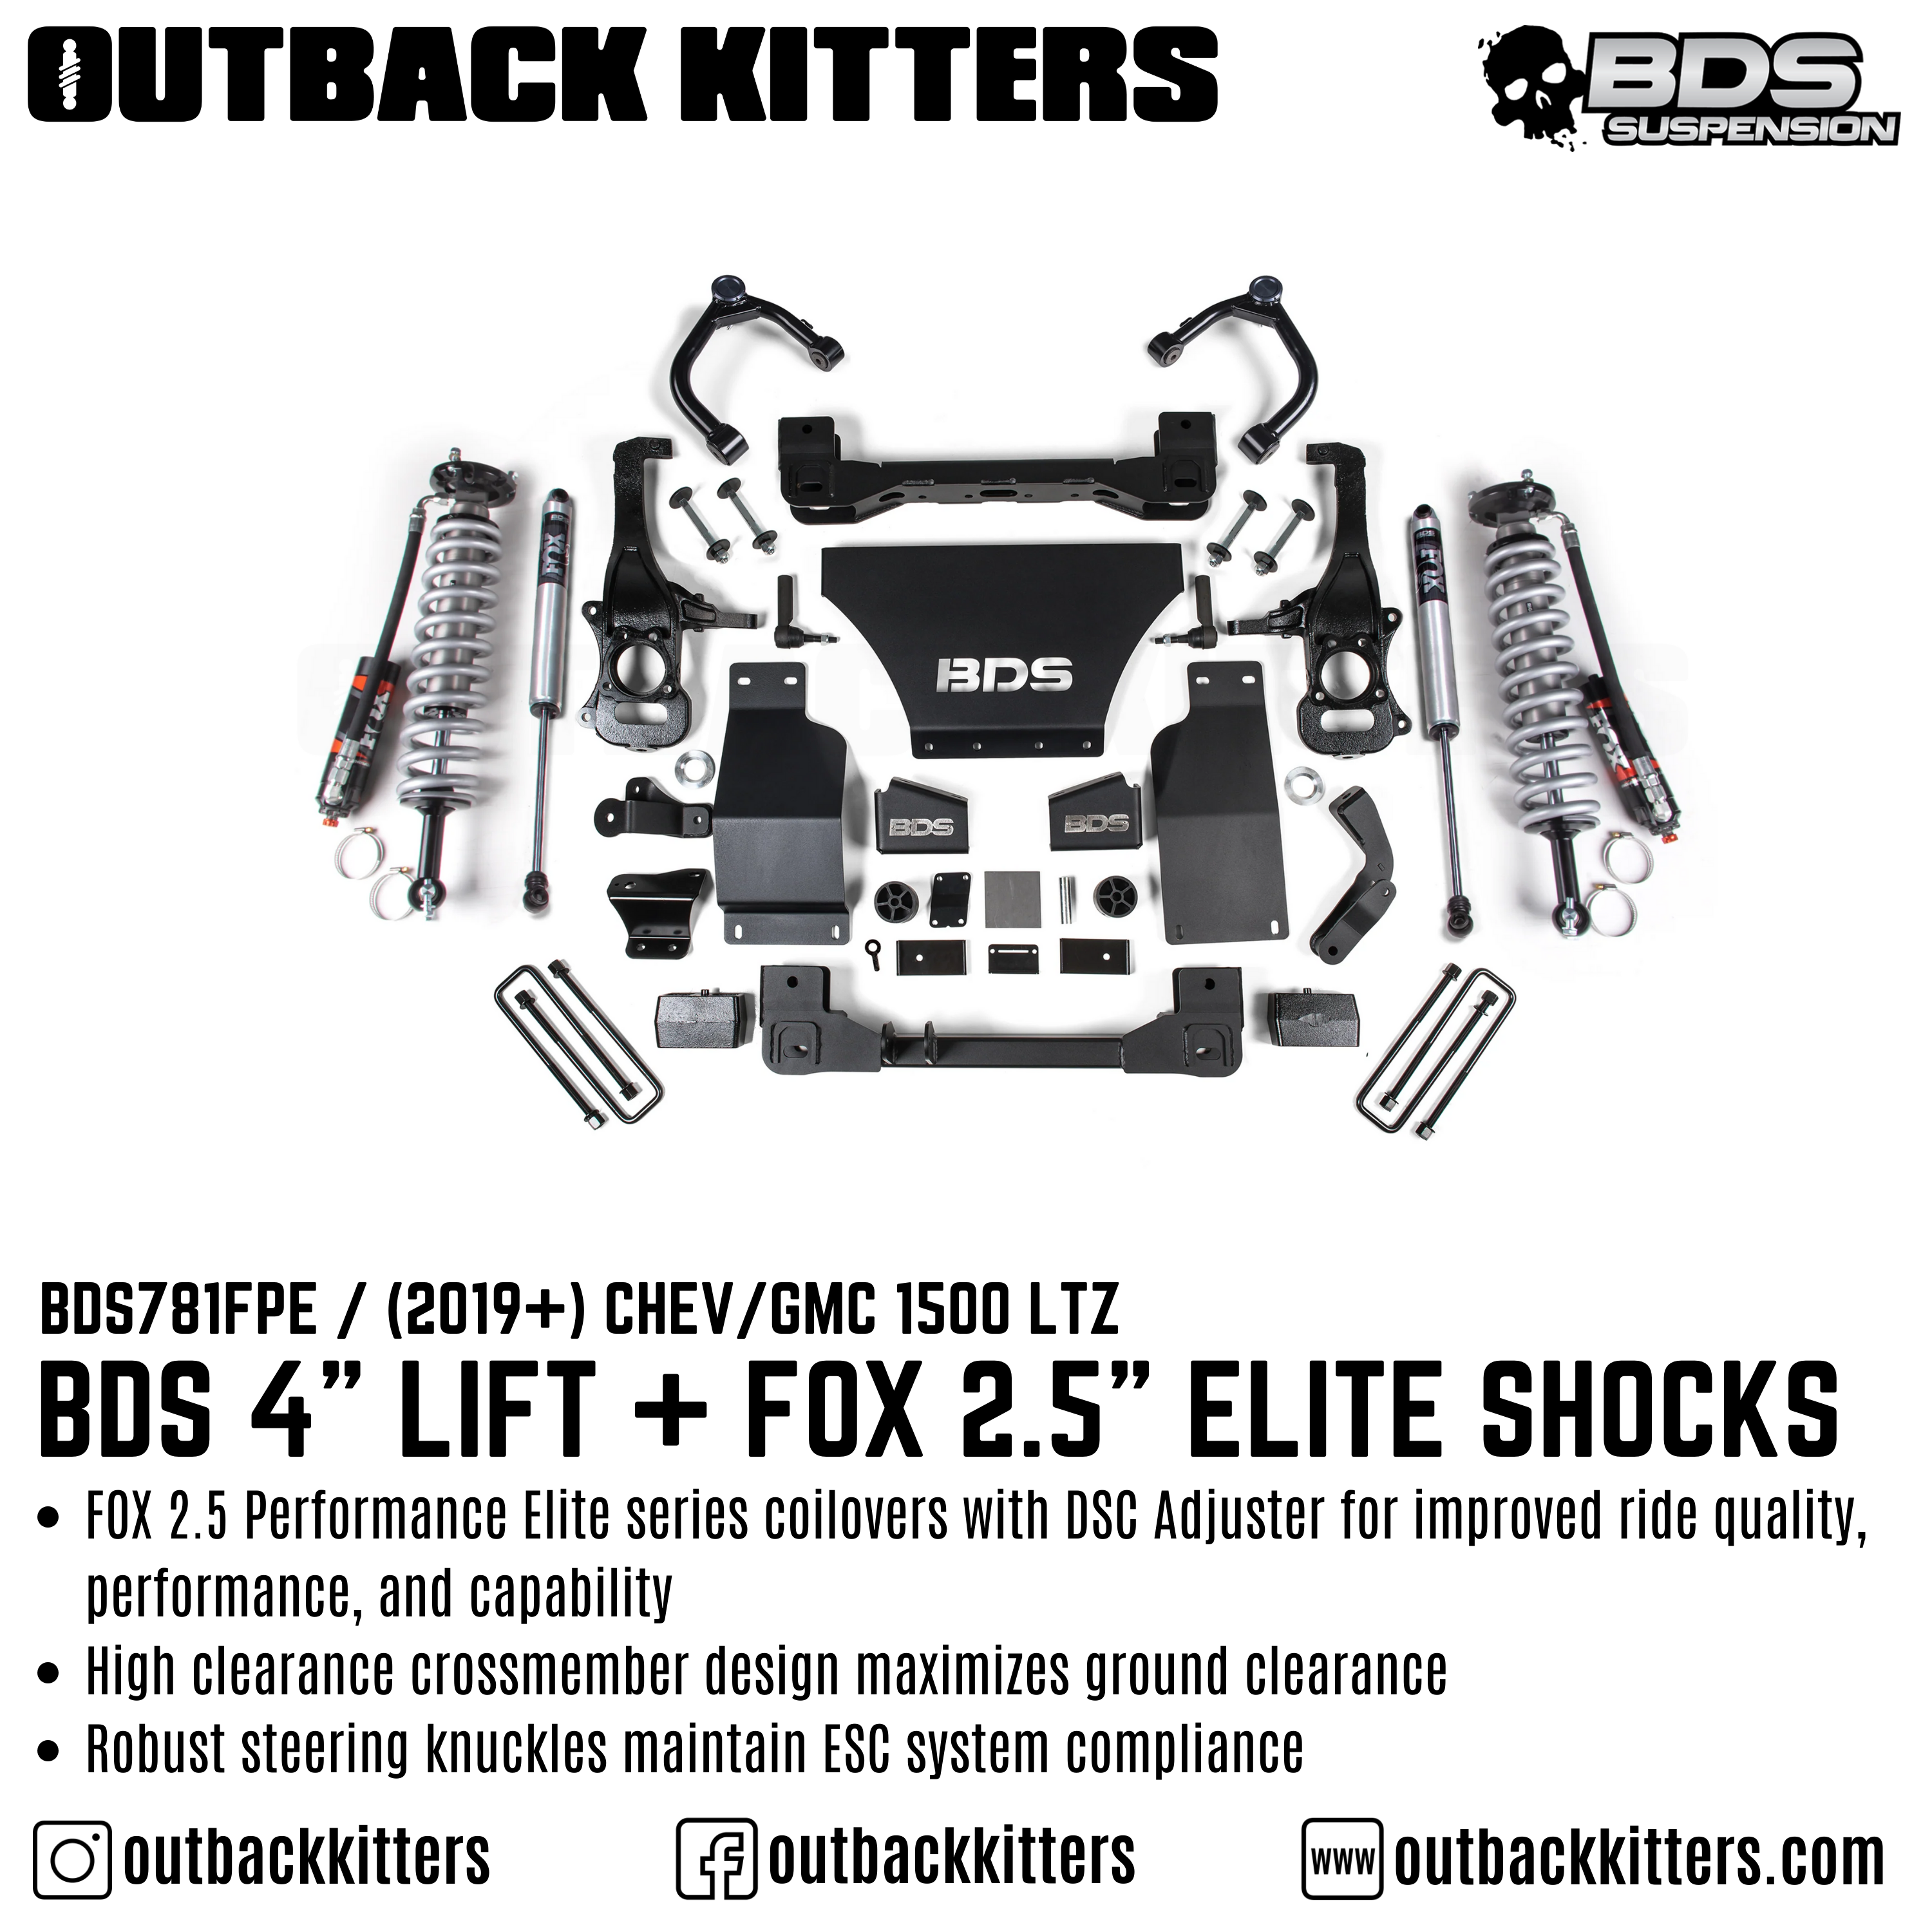 BDS Suspension 4" Lift Kit for 2019+ Chevy Silverado 1500 with Fox Shocks - Outback Kitters